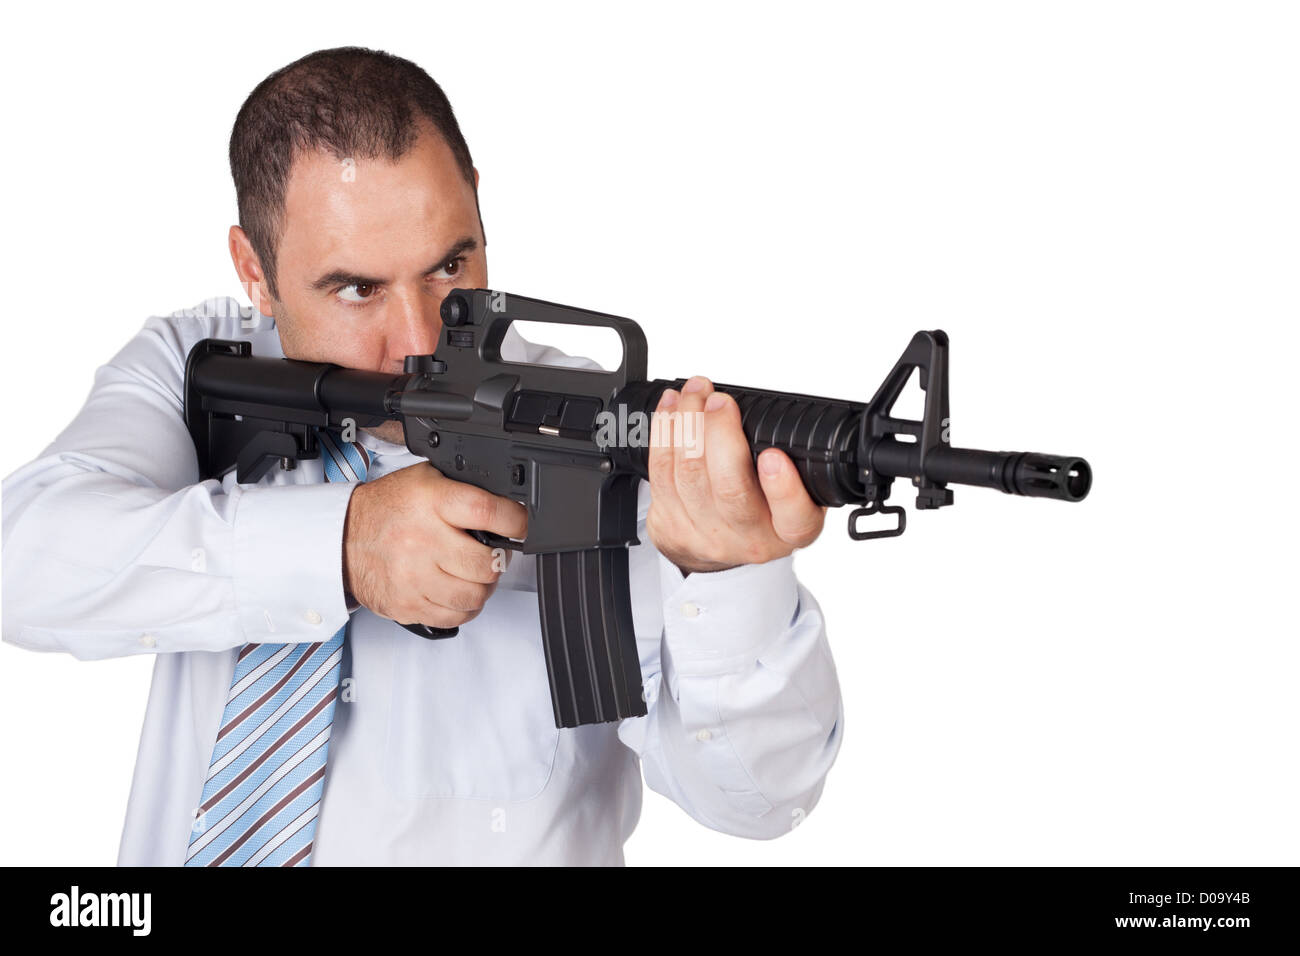 man with a rifle, image on a white background. Stock Photo